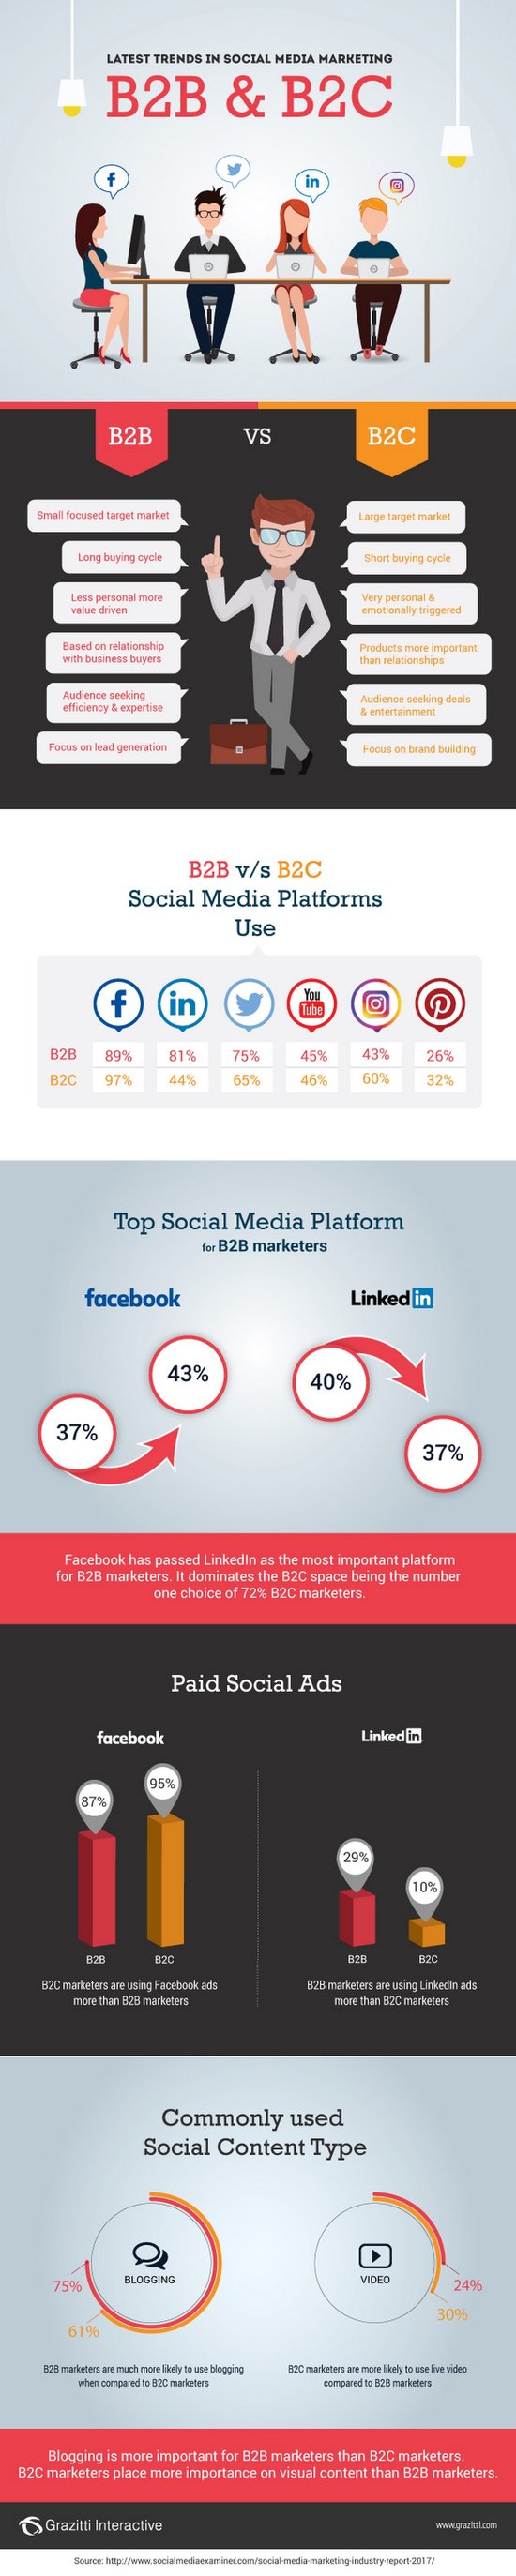 170808-infographic-latest-trends-in-social.jpg